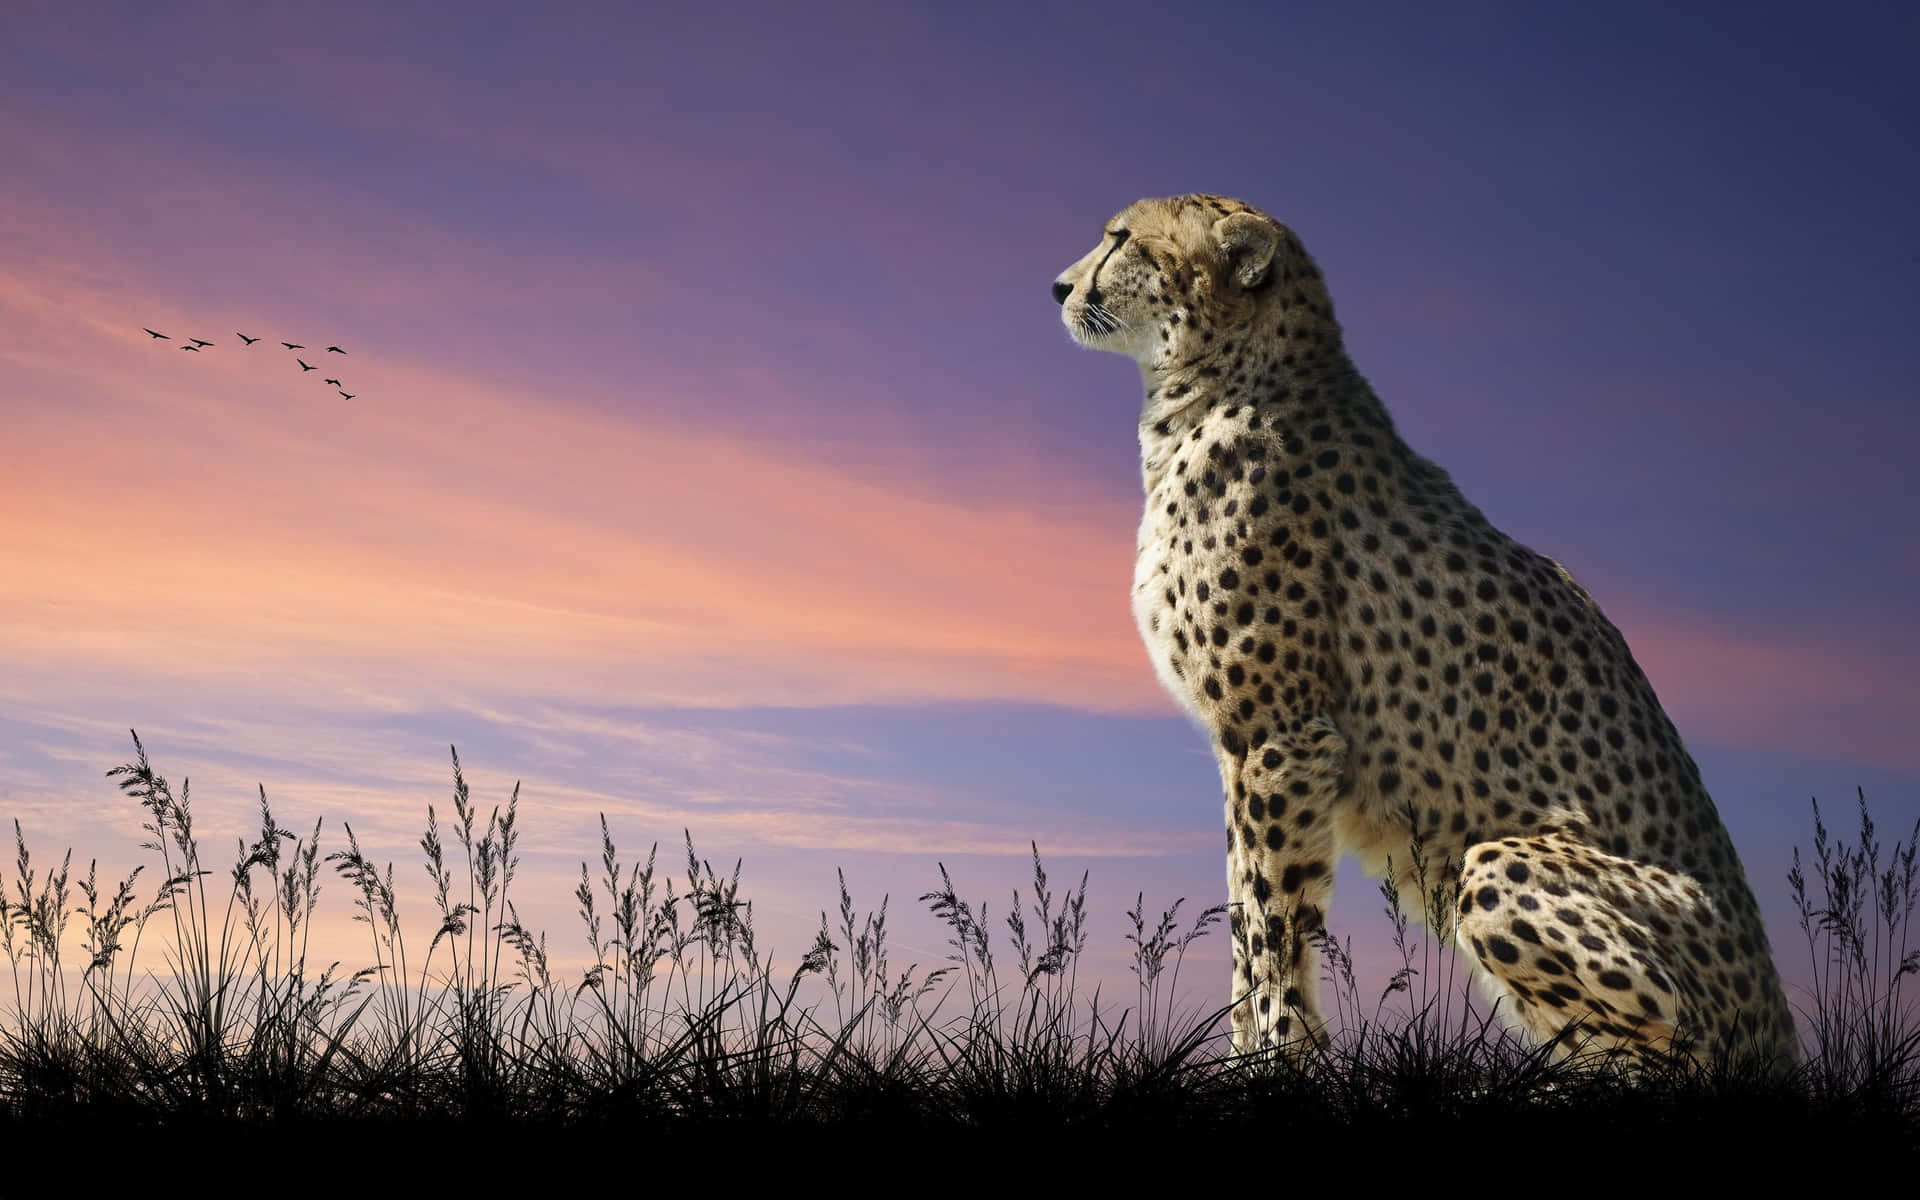 Look at the magnificent grace of the cheetah!